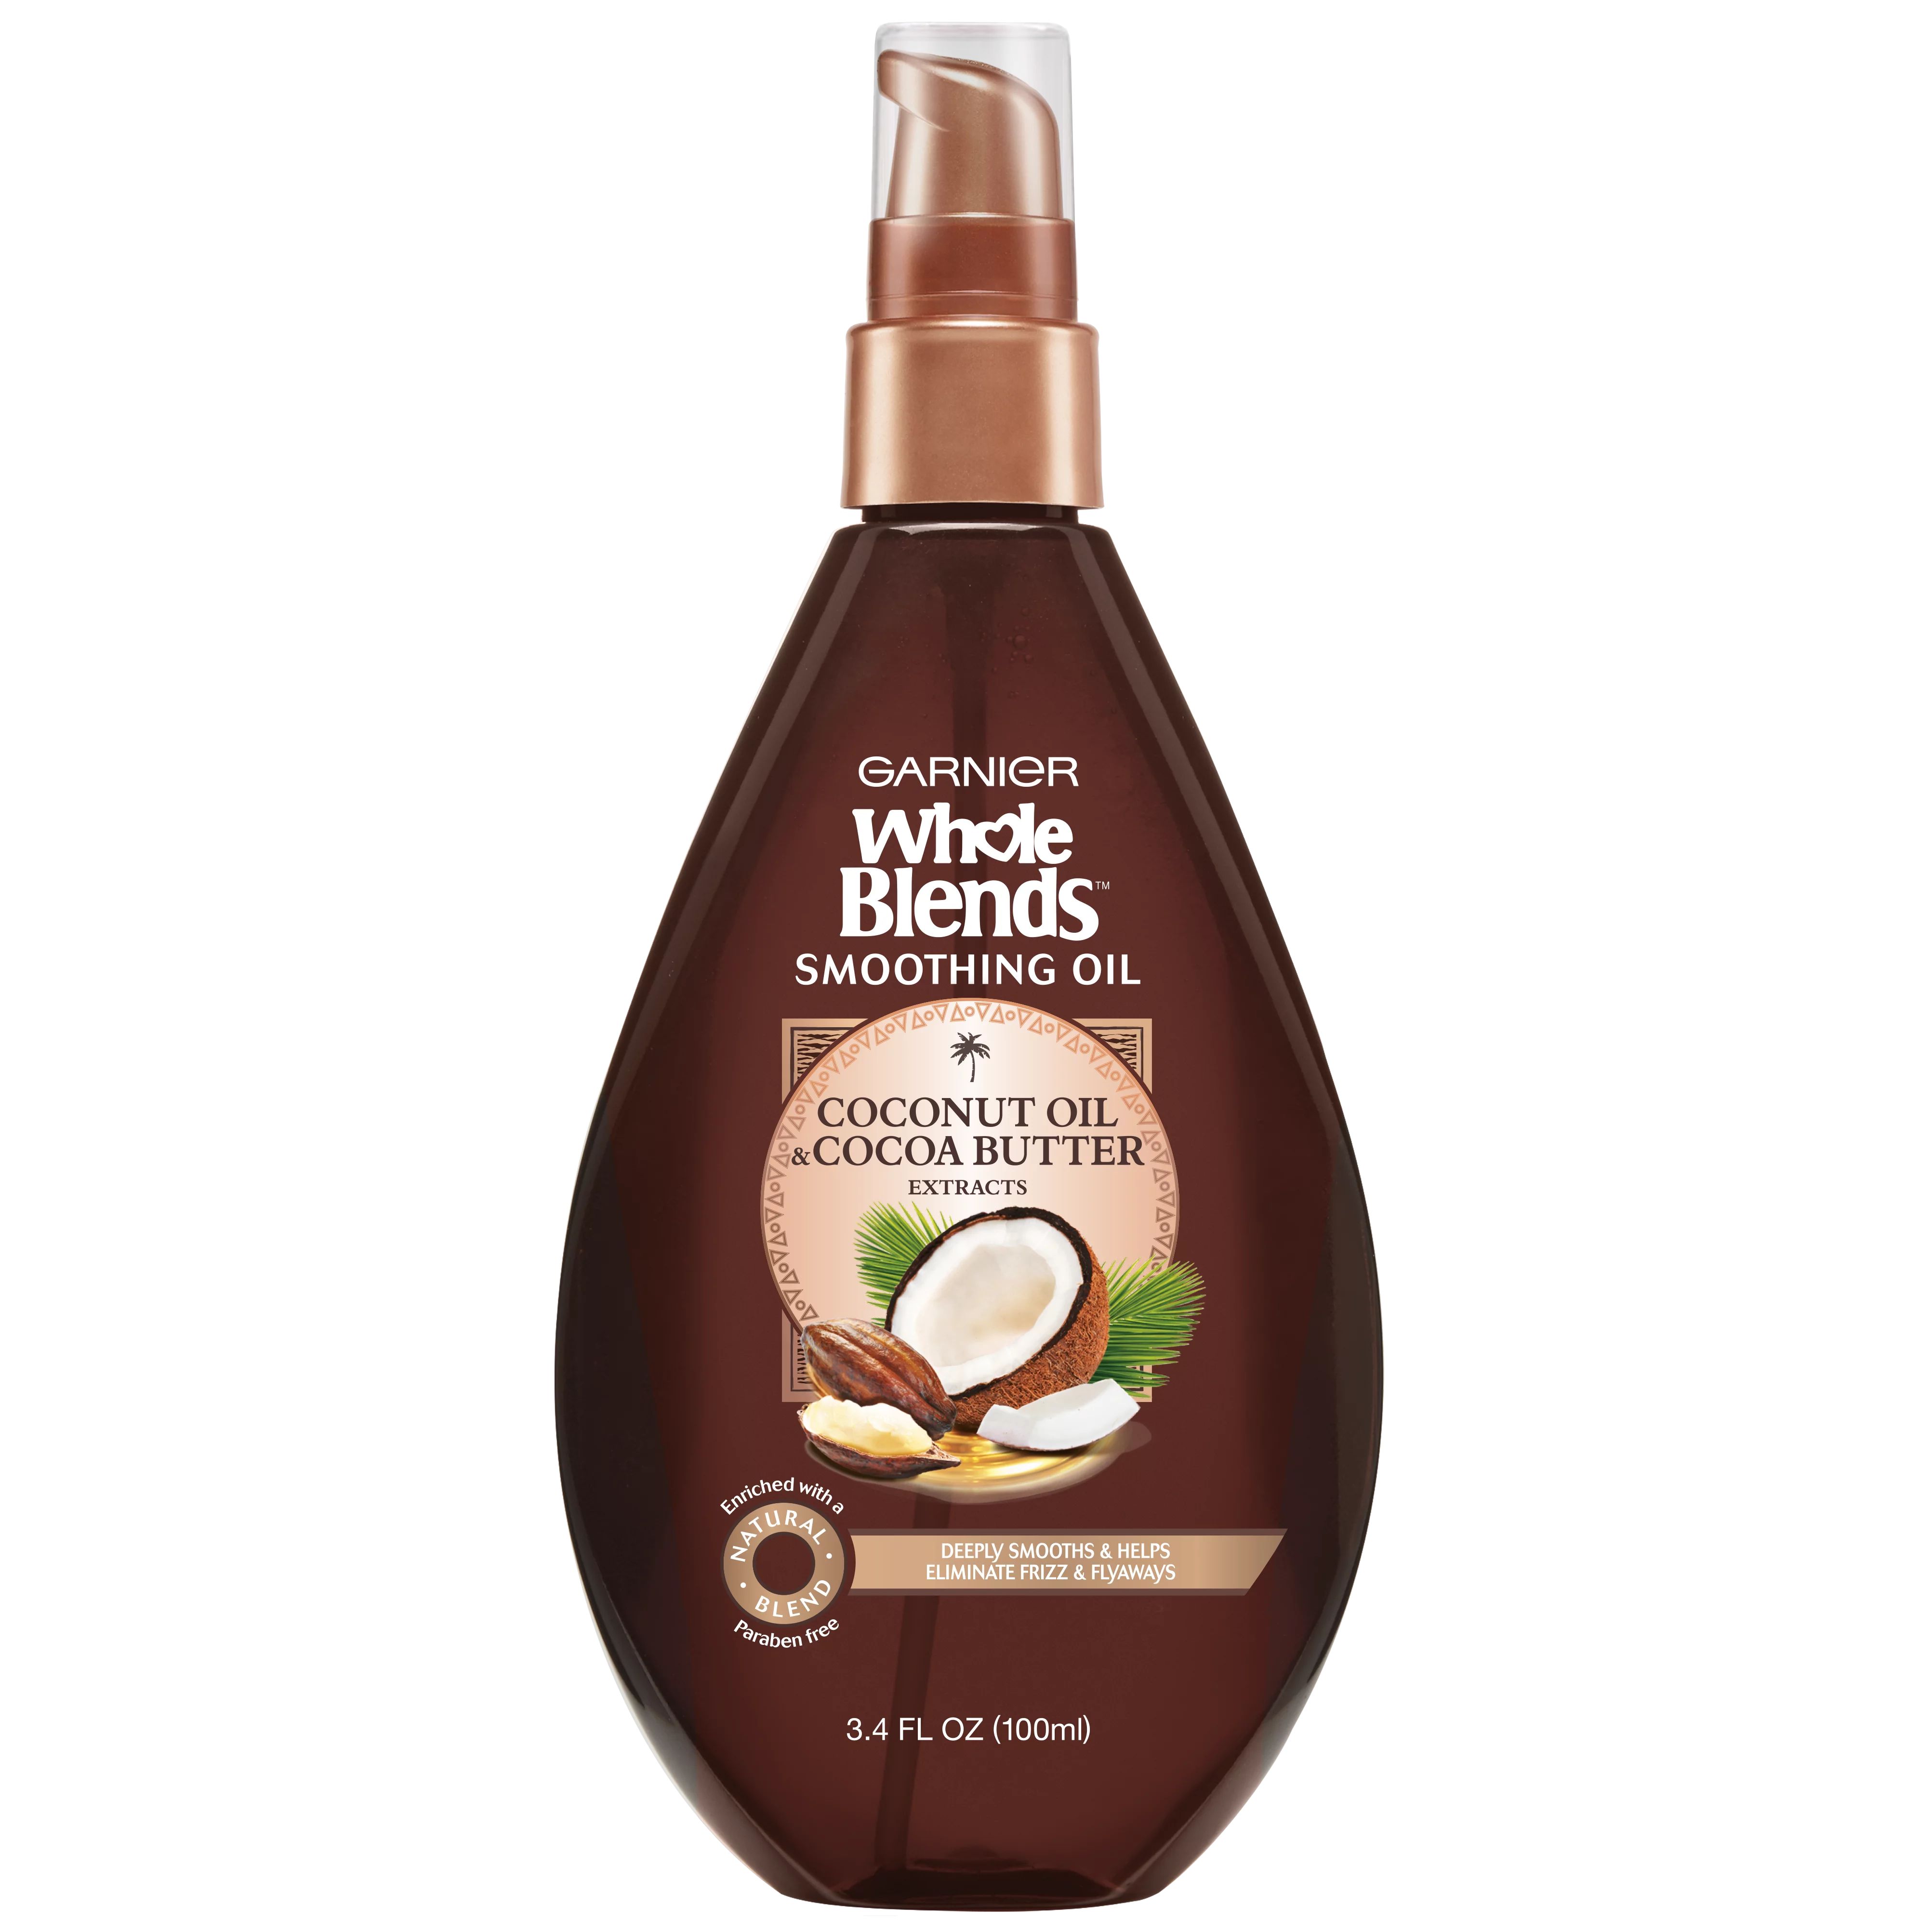 Garnier Whole Blends Smoothing Oil with Coconut Oil & Cocoa Butter Extracts, 3.4 fl. oz. | Walmart (US)